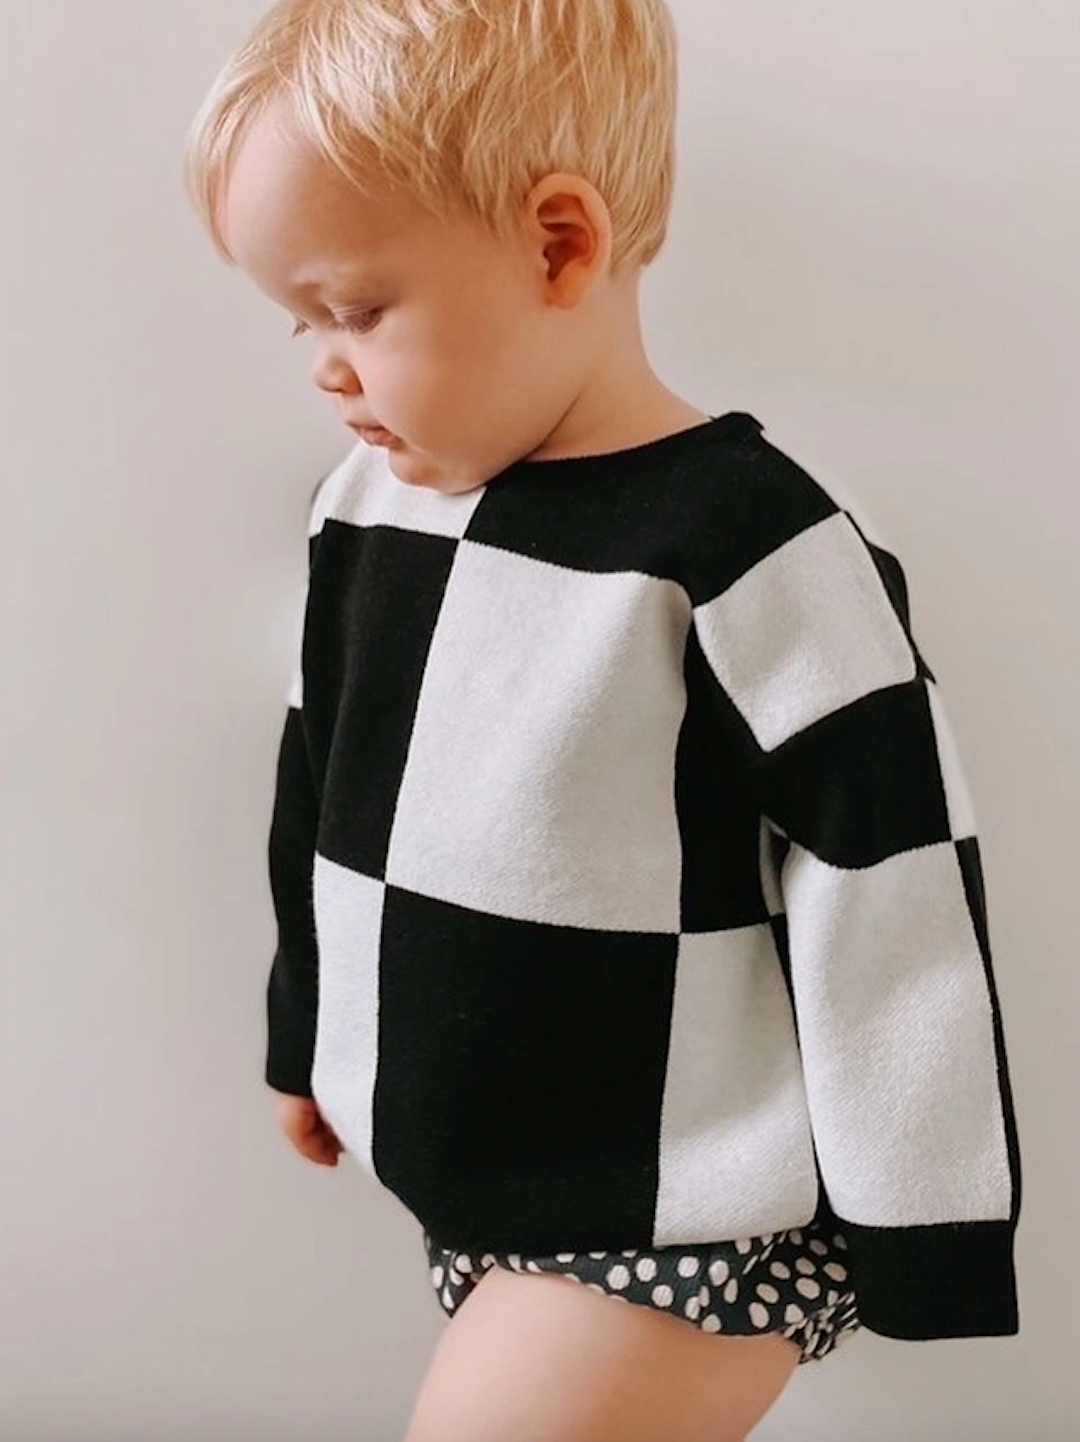 A toddler wearing a kids' sweatshirt in a bold black and white checkerboard